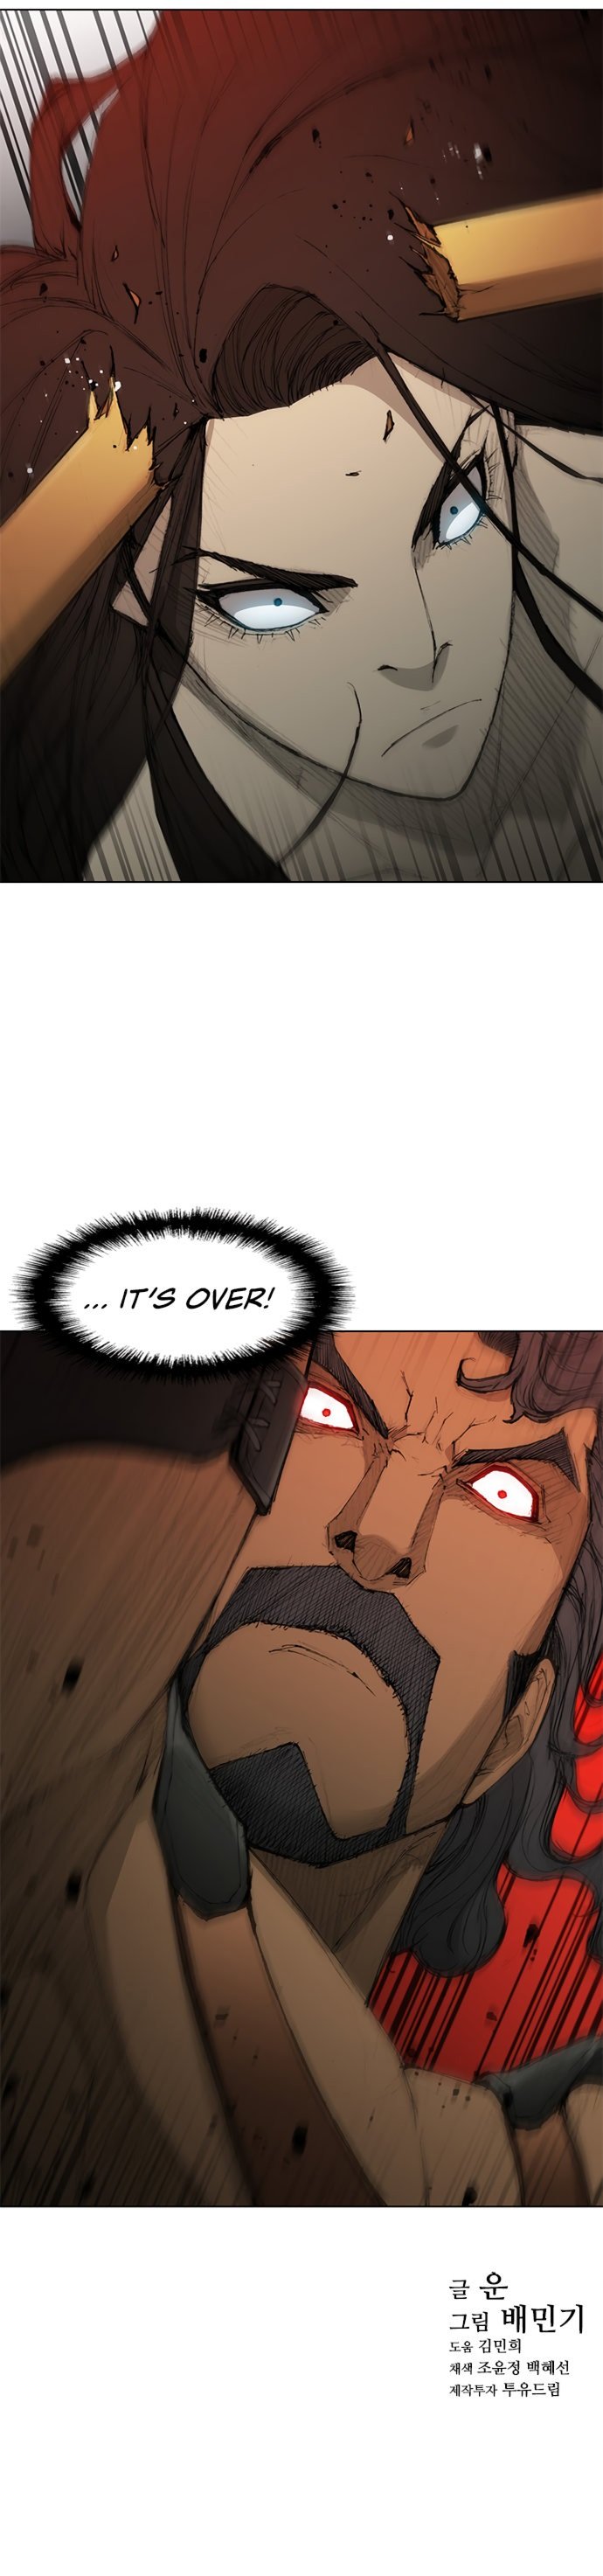 long-way-of-the-warrior-chap-43-11